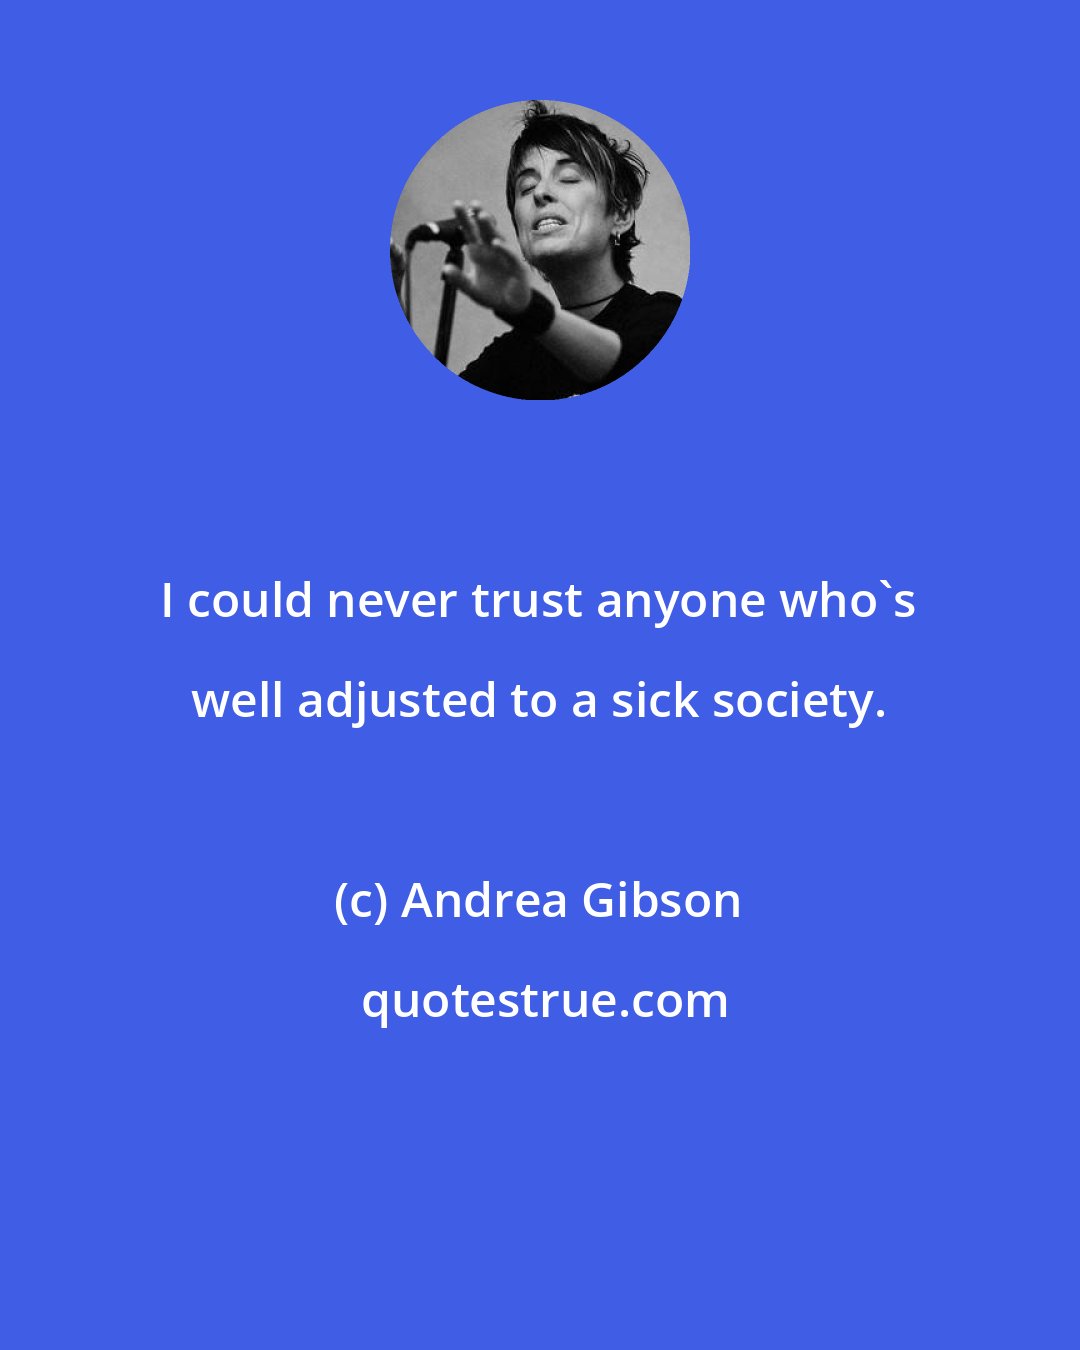 Andrea Gibson: I could never trust anyone who's well adjusted to a sick society.